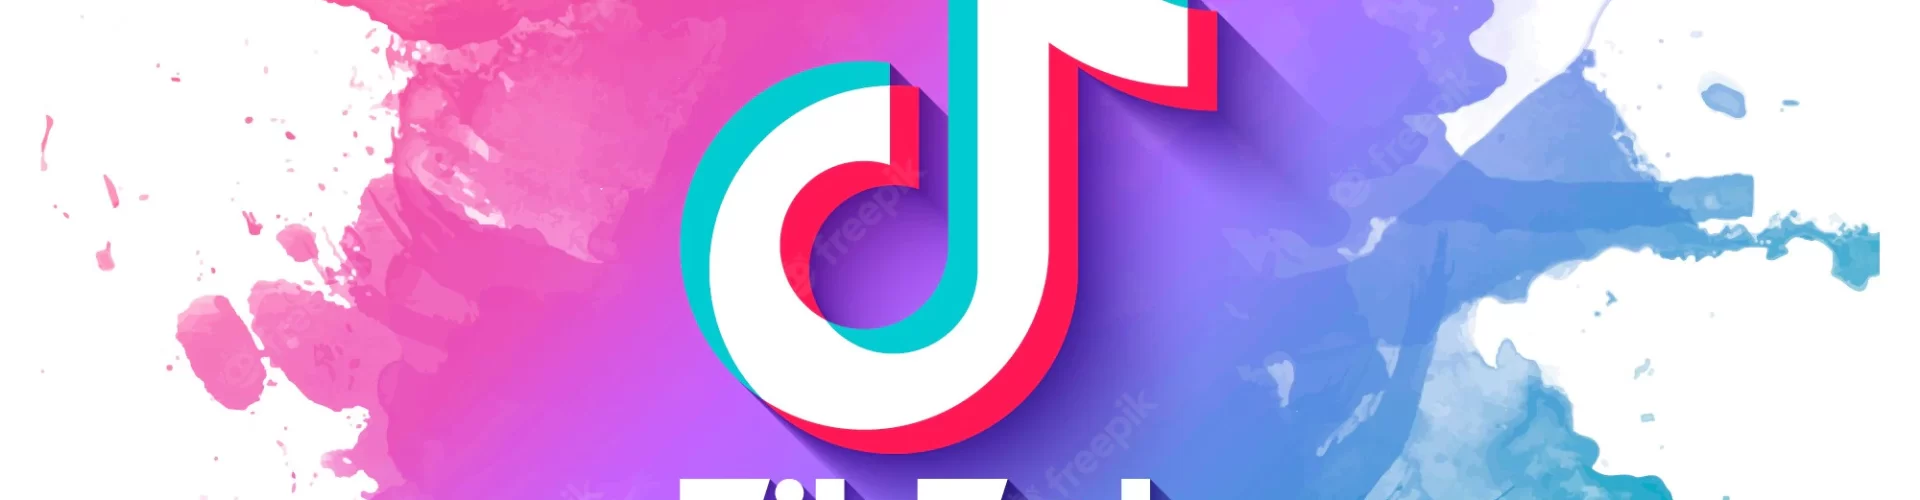 TikTok will be banned on most US federal government devices